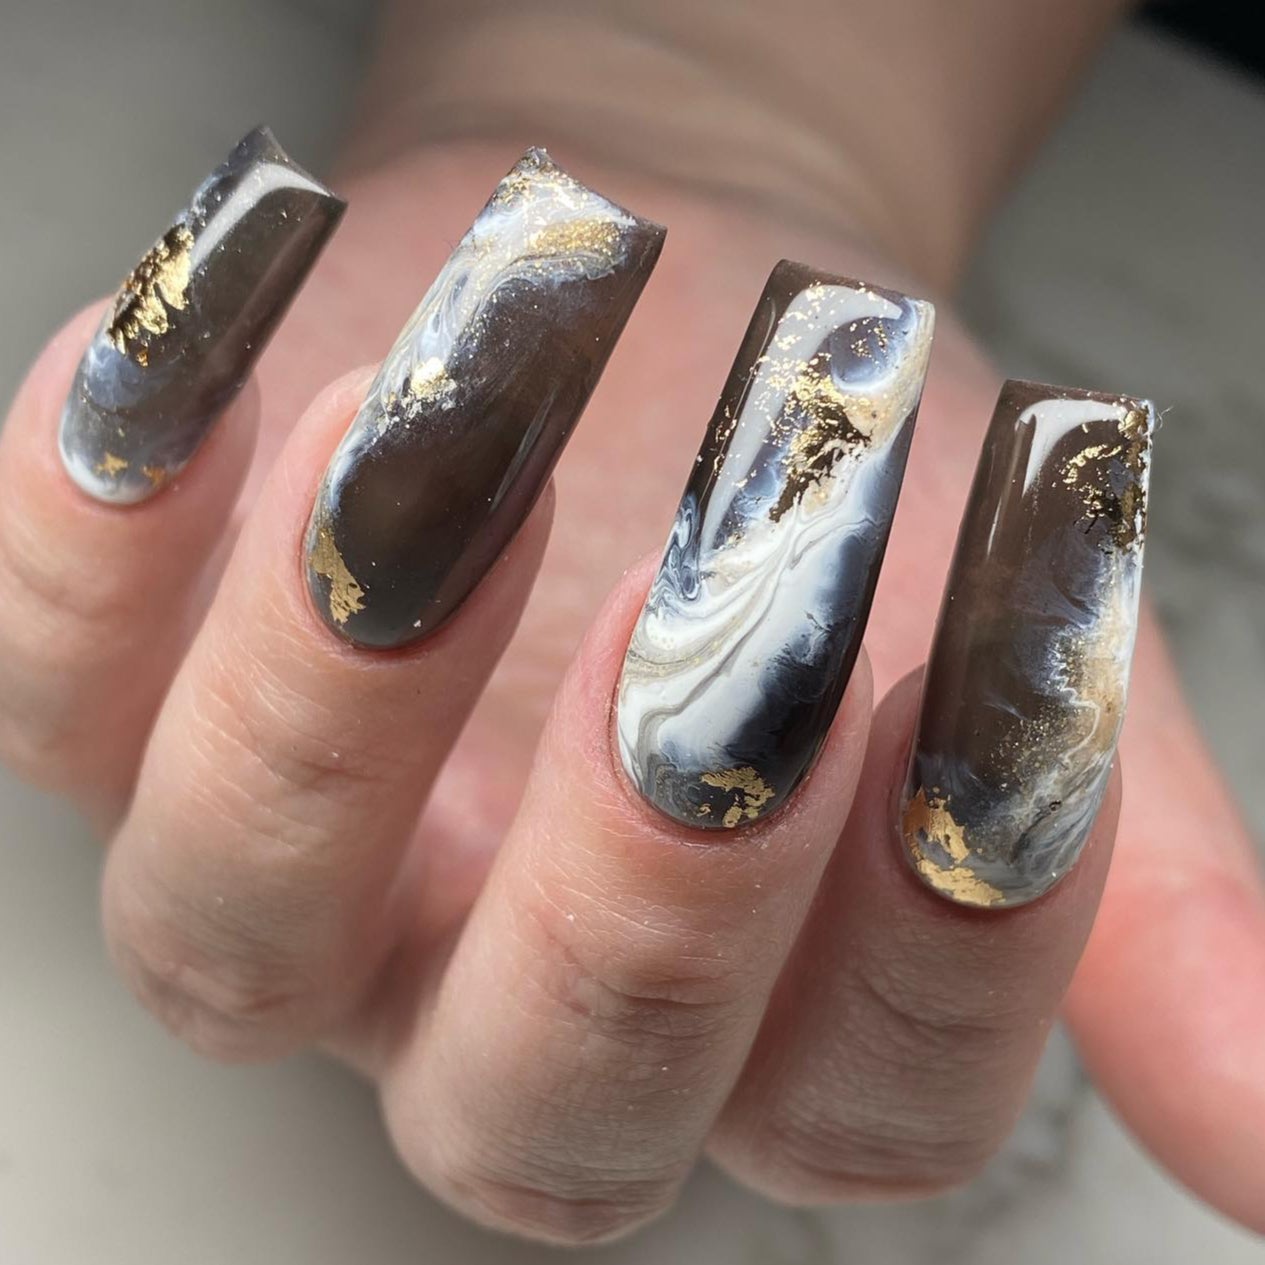 How To Do Water Marble Nail Art, Which Is Not Nearly As Hard As It Looks